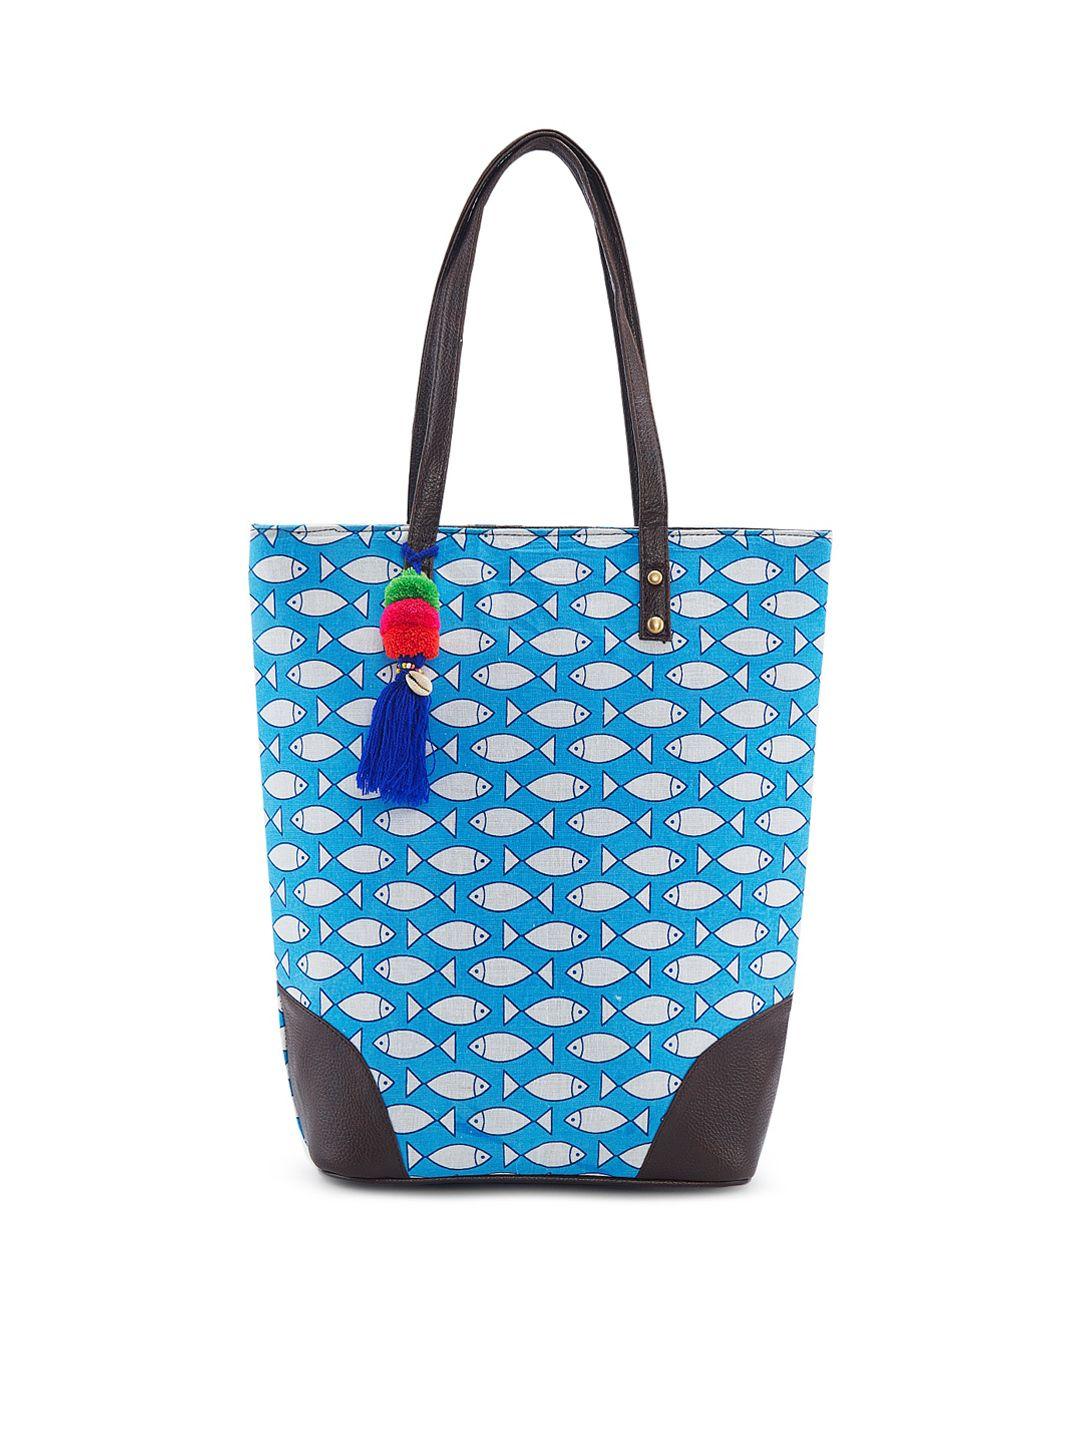 nepri graphic printed shopper tote bag with tasselled